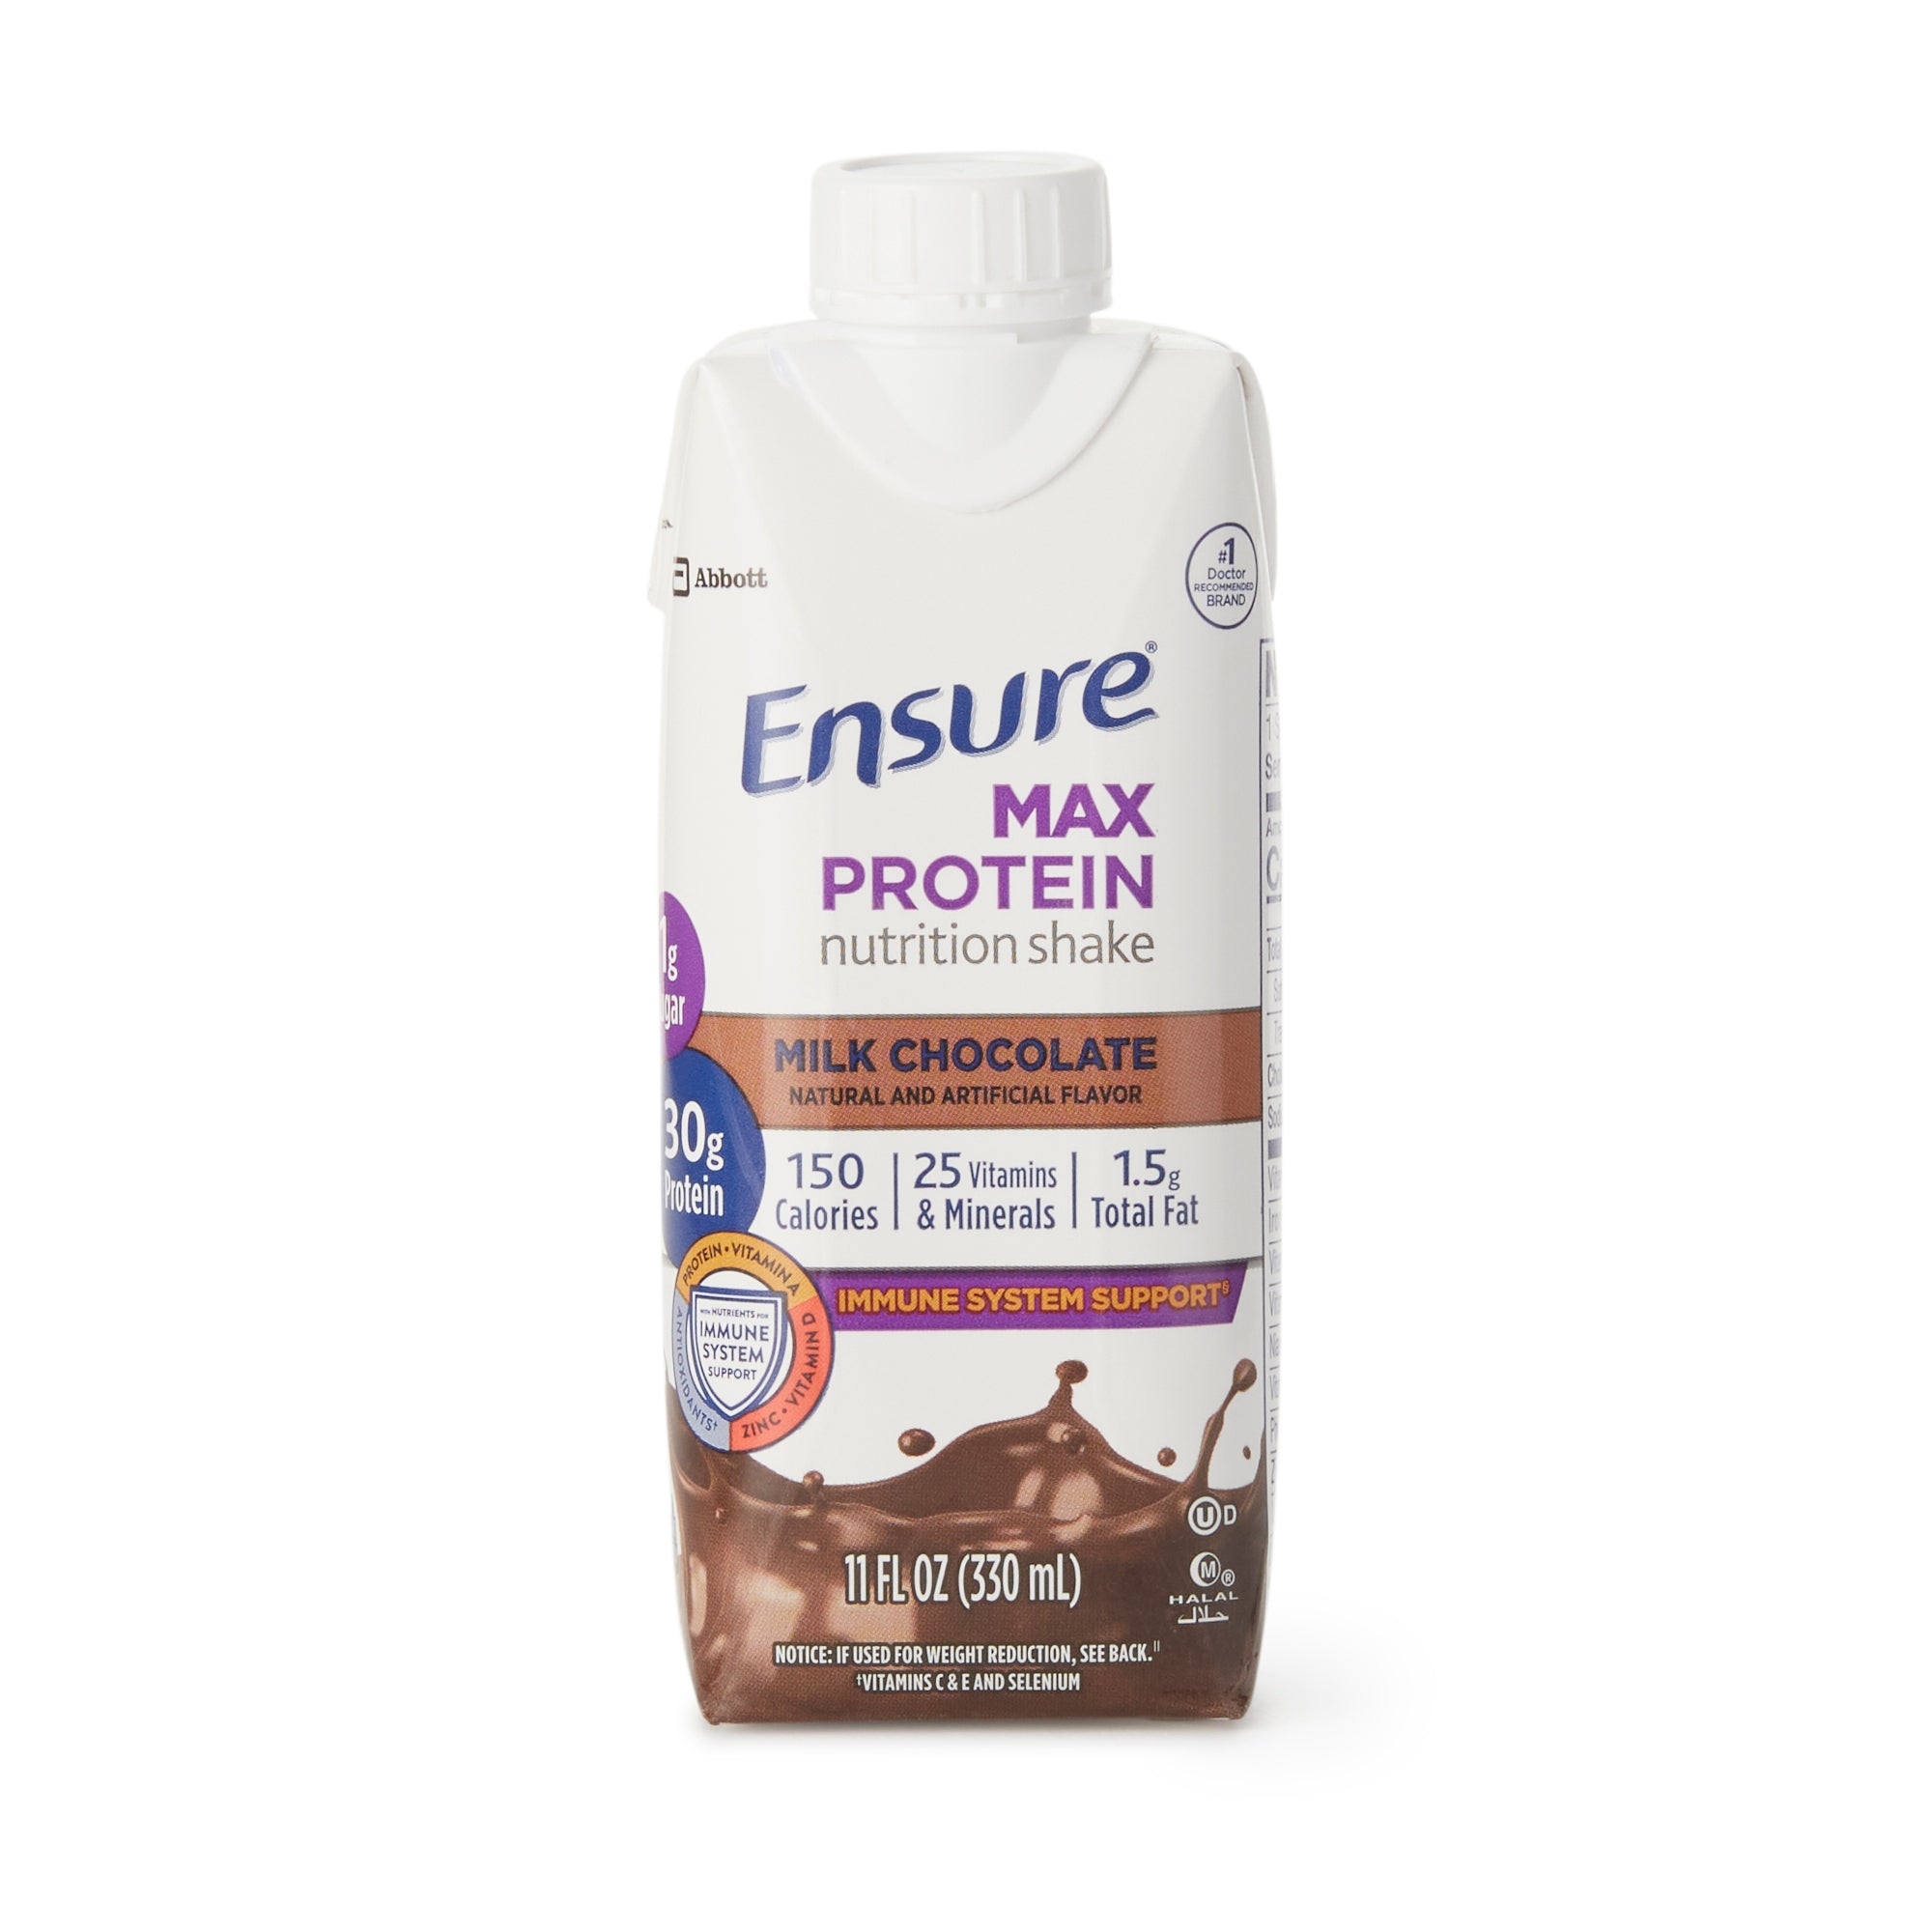 Ensure Max Protein Nutrition Shake, Milk Chocolate, 11oz - Muscle Health Support